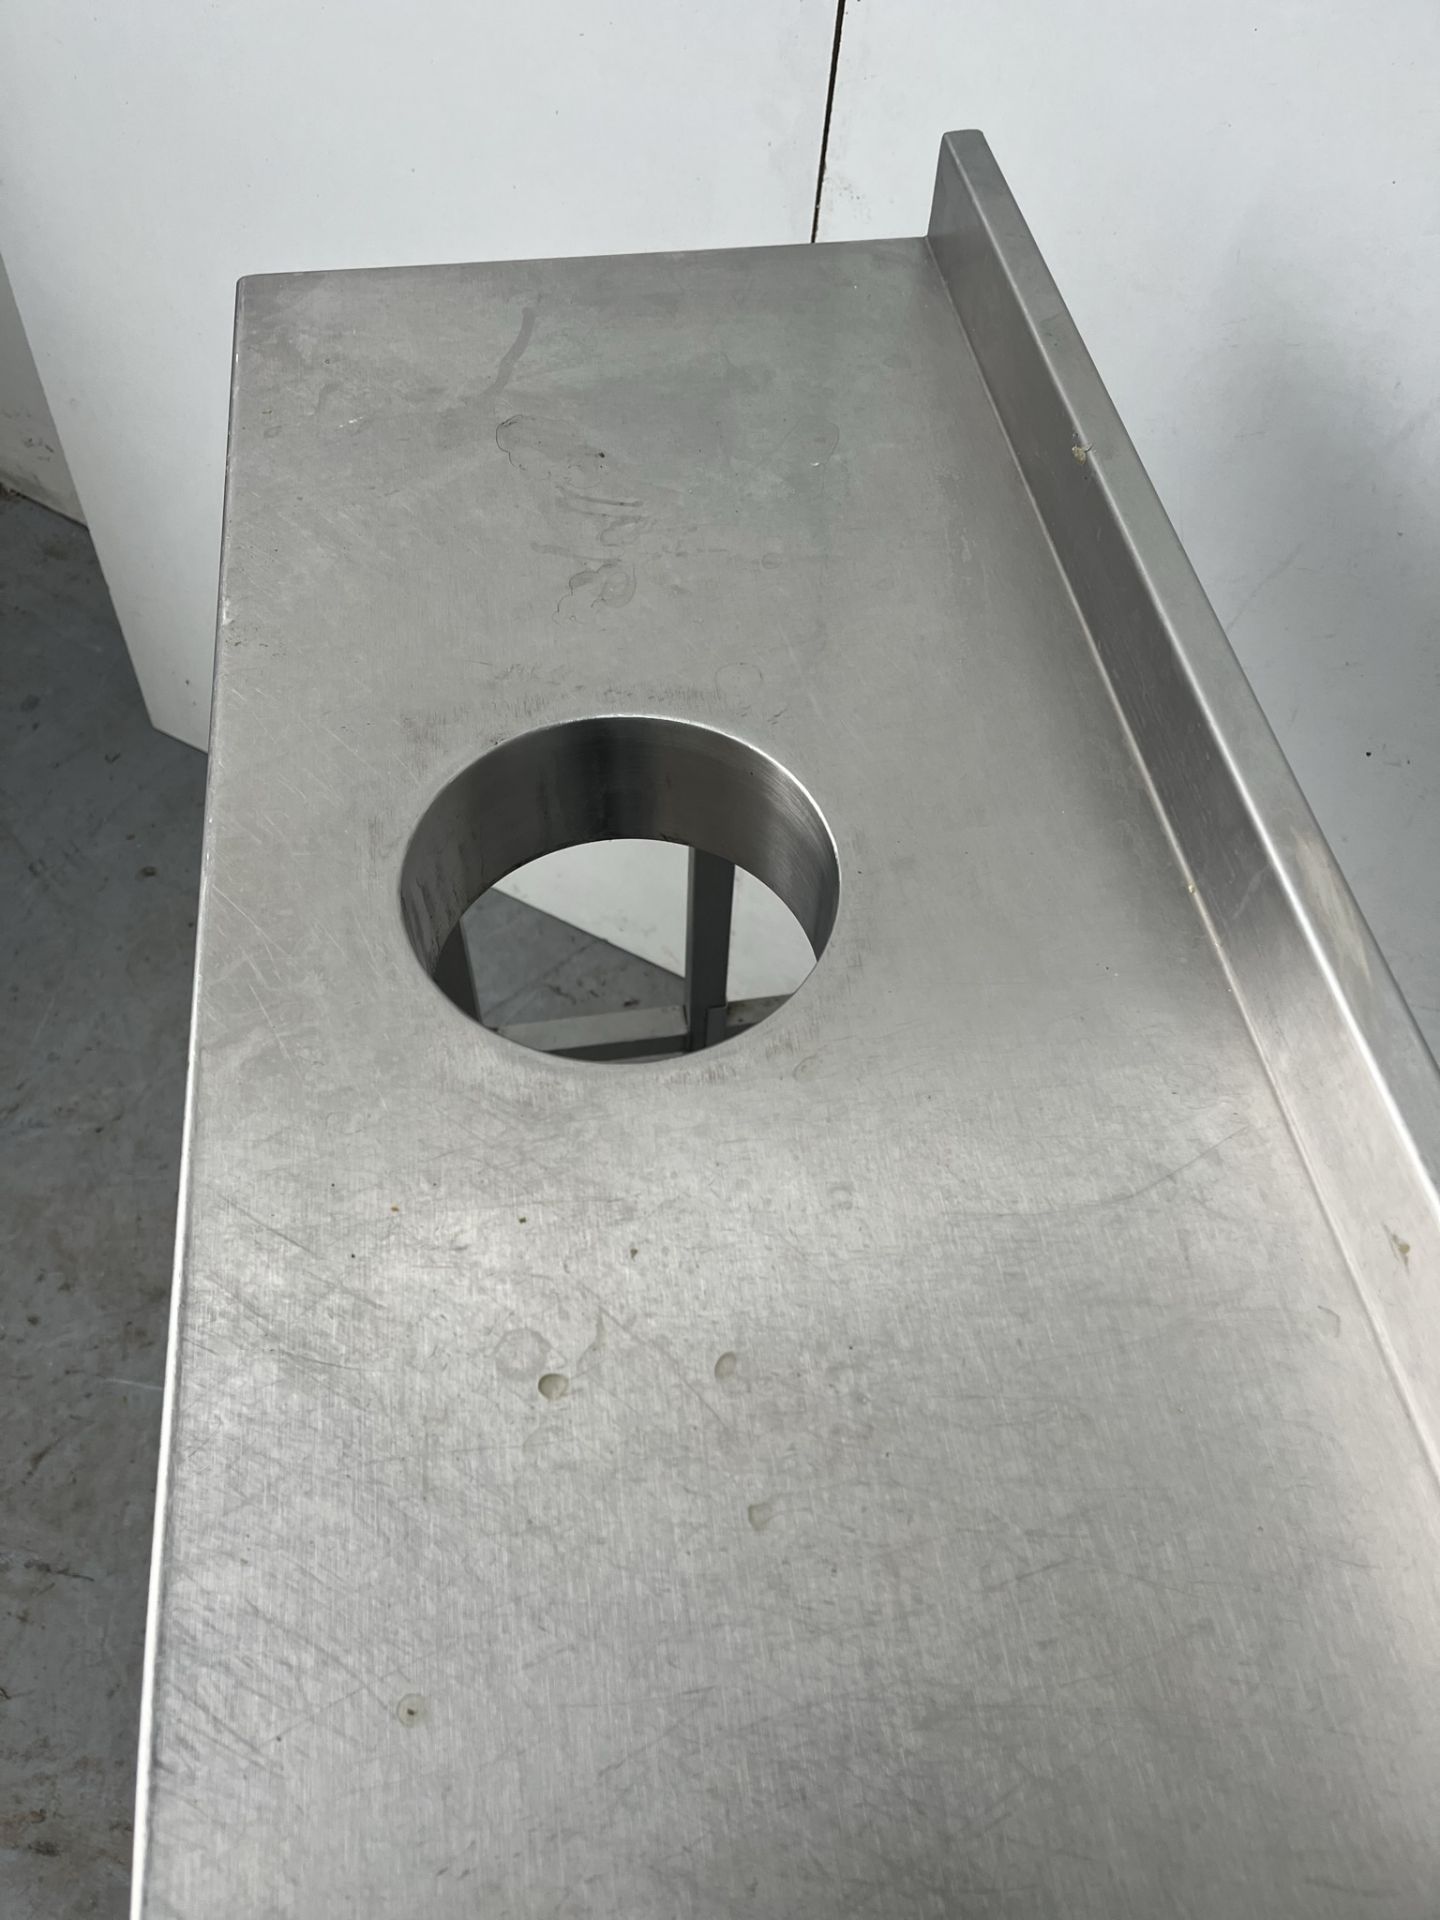 850mm Stainless Steel Catering Preperation Table With Waste Disposal Hole - Bild 6 aus 7